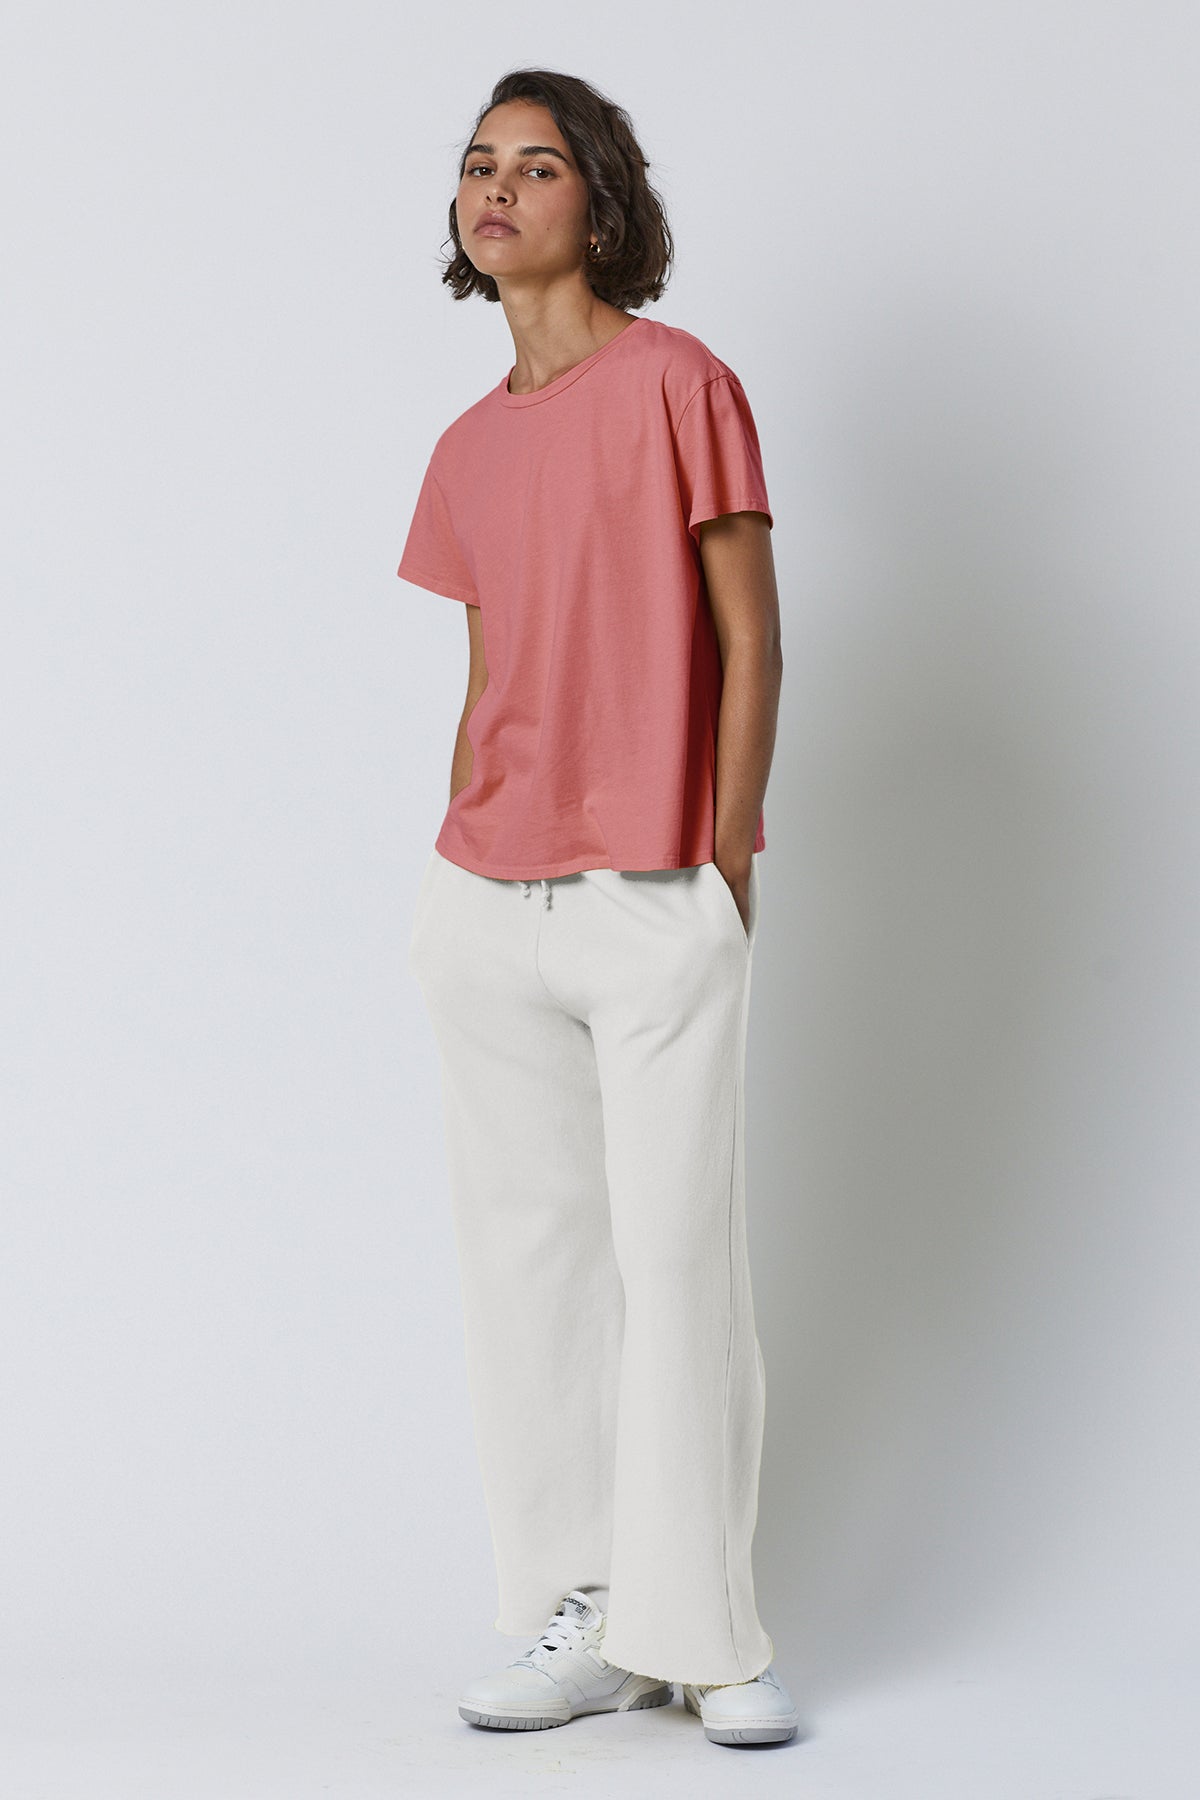 Montecito Sweatpant in beach with Topanga Tee in cedar full length front & side-26040918180033